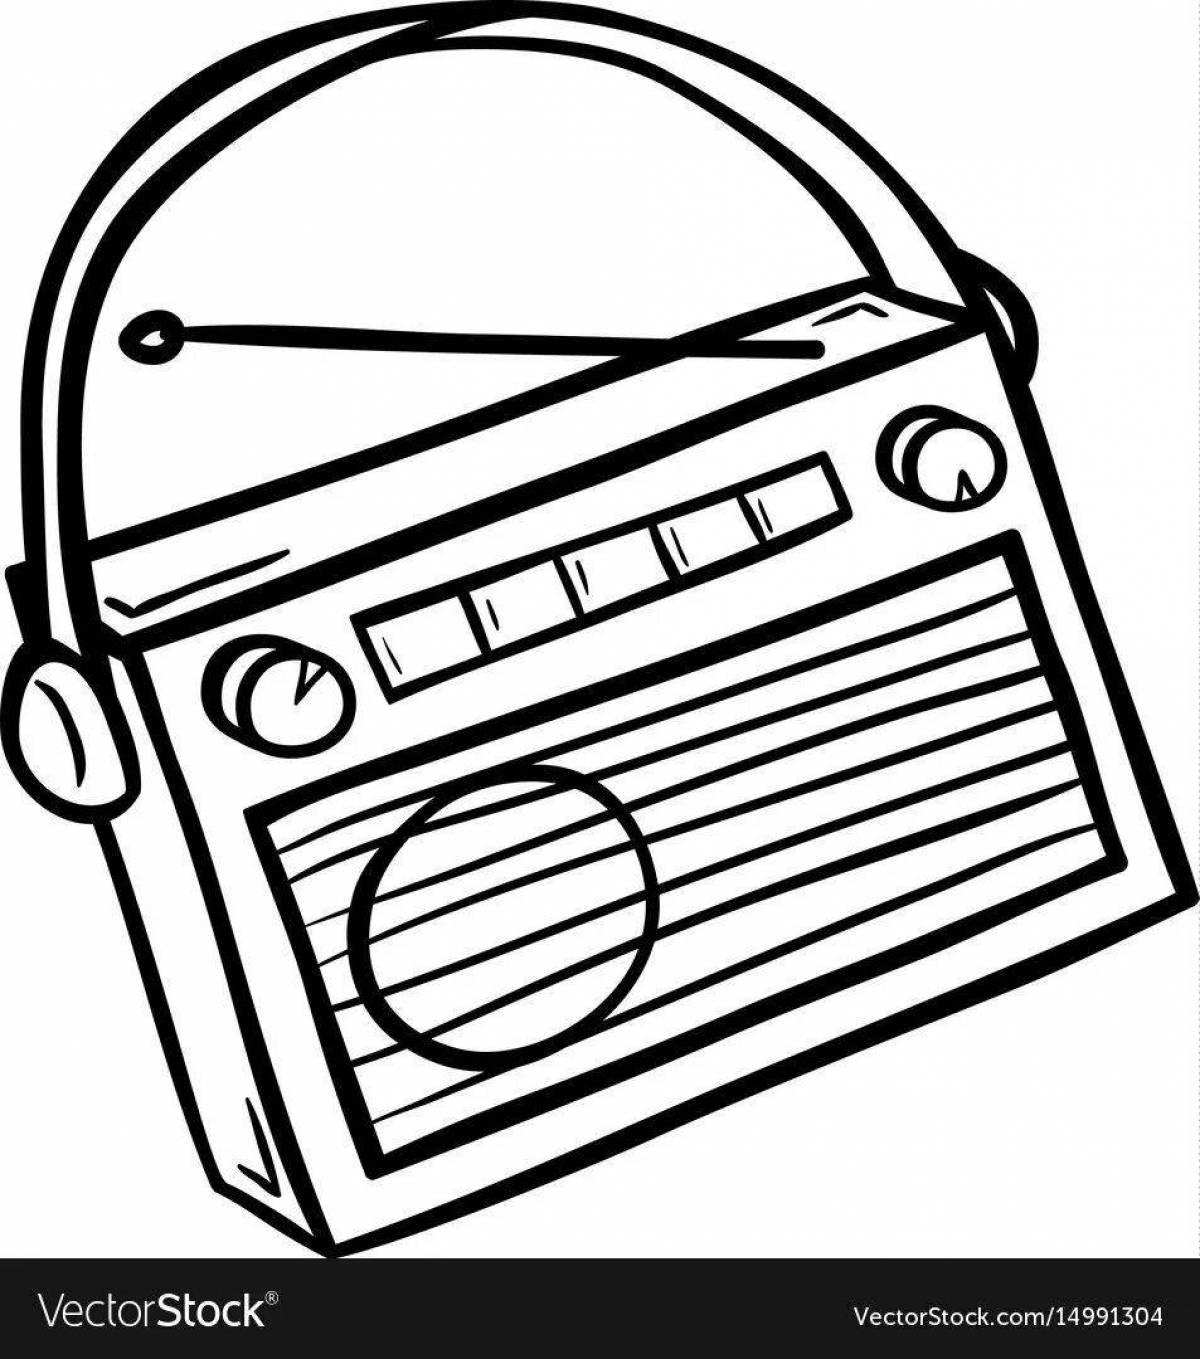 Glowing radio coloring page